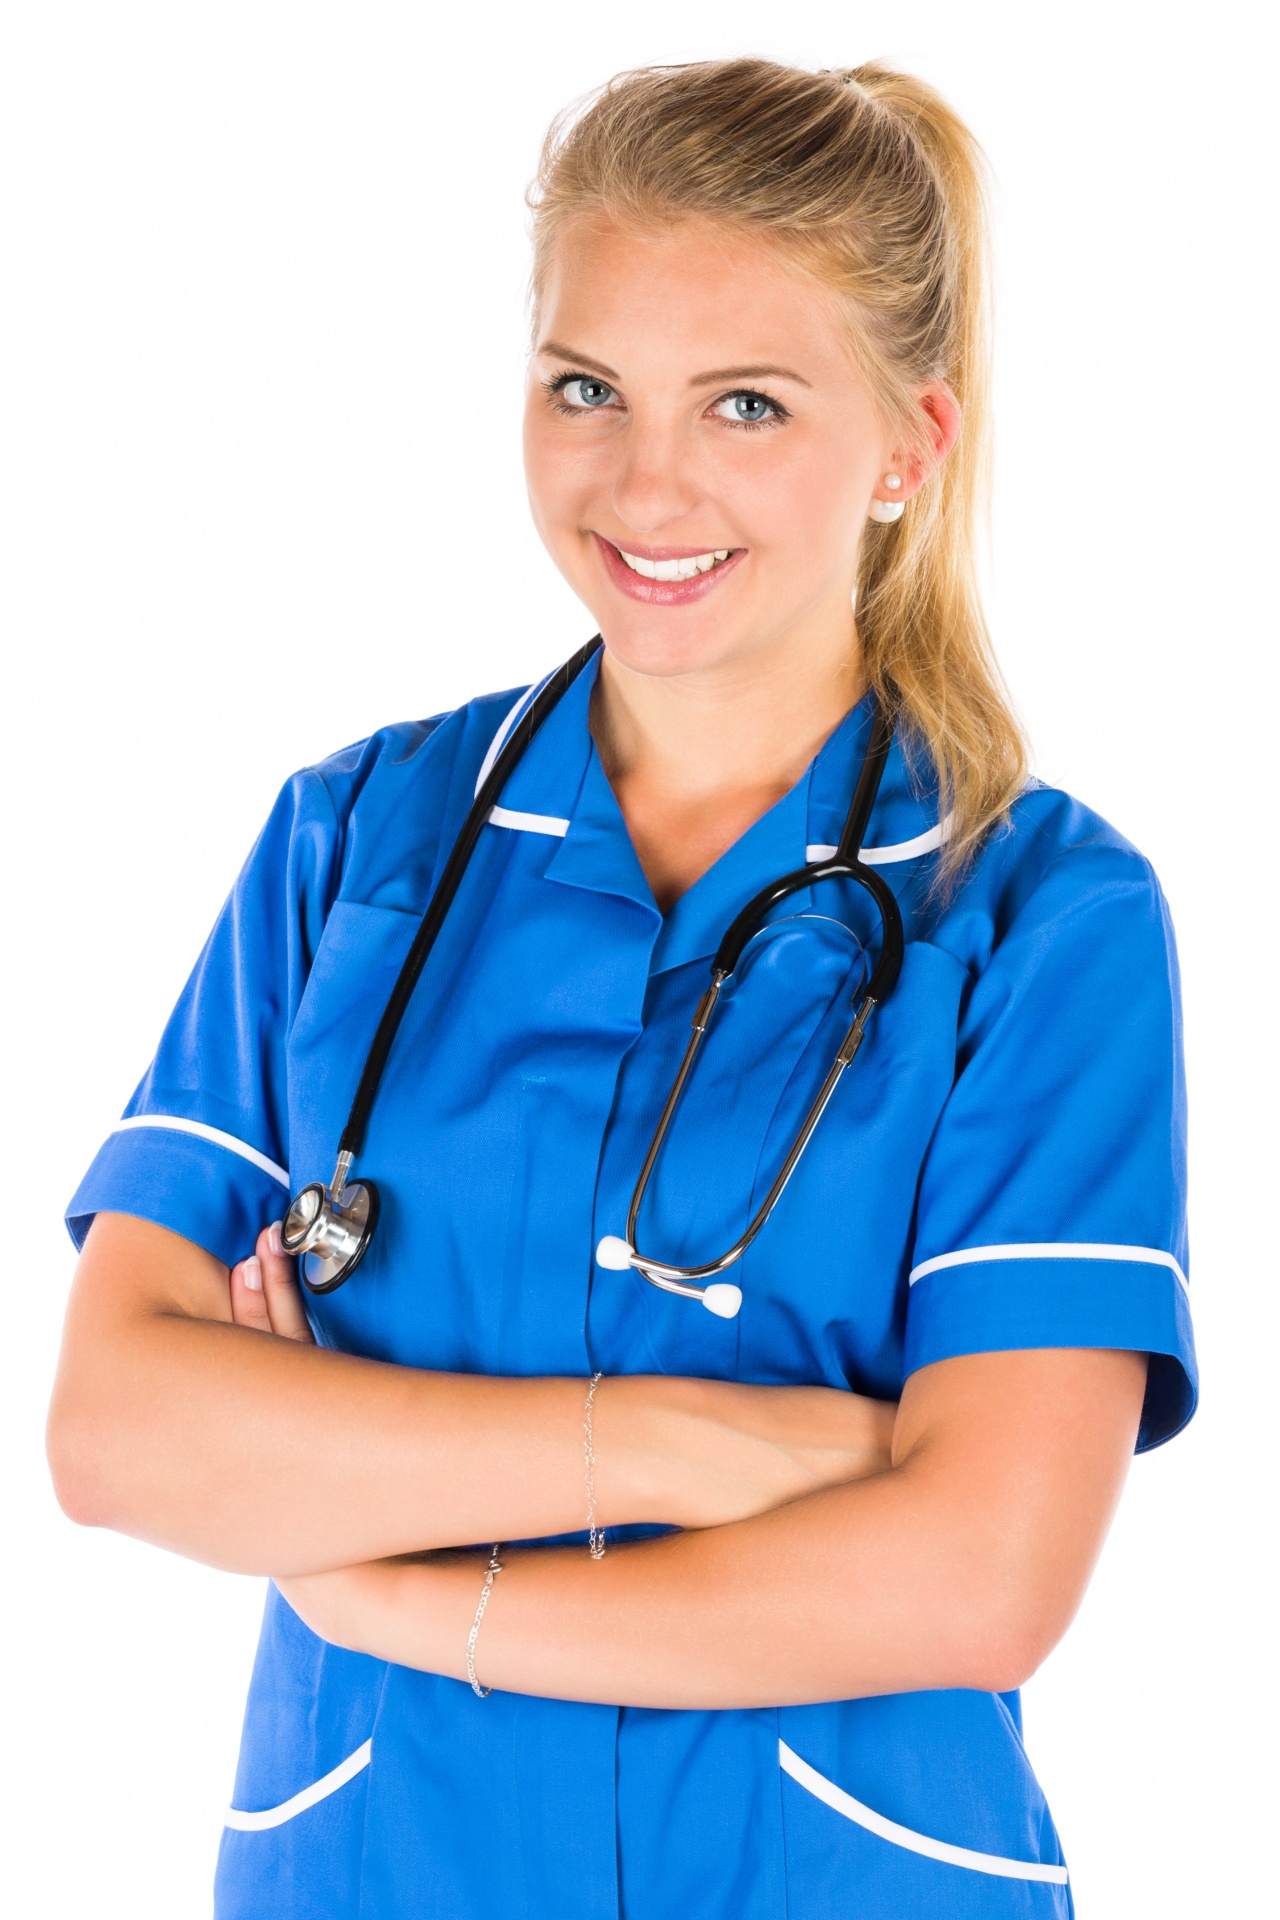 The compact allows nurses to have a single multistate license, which permit...